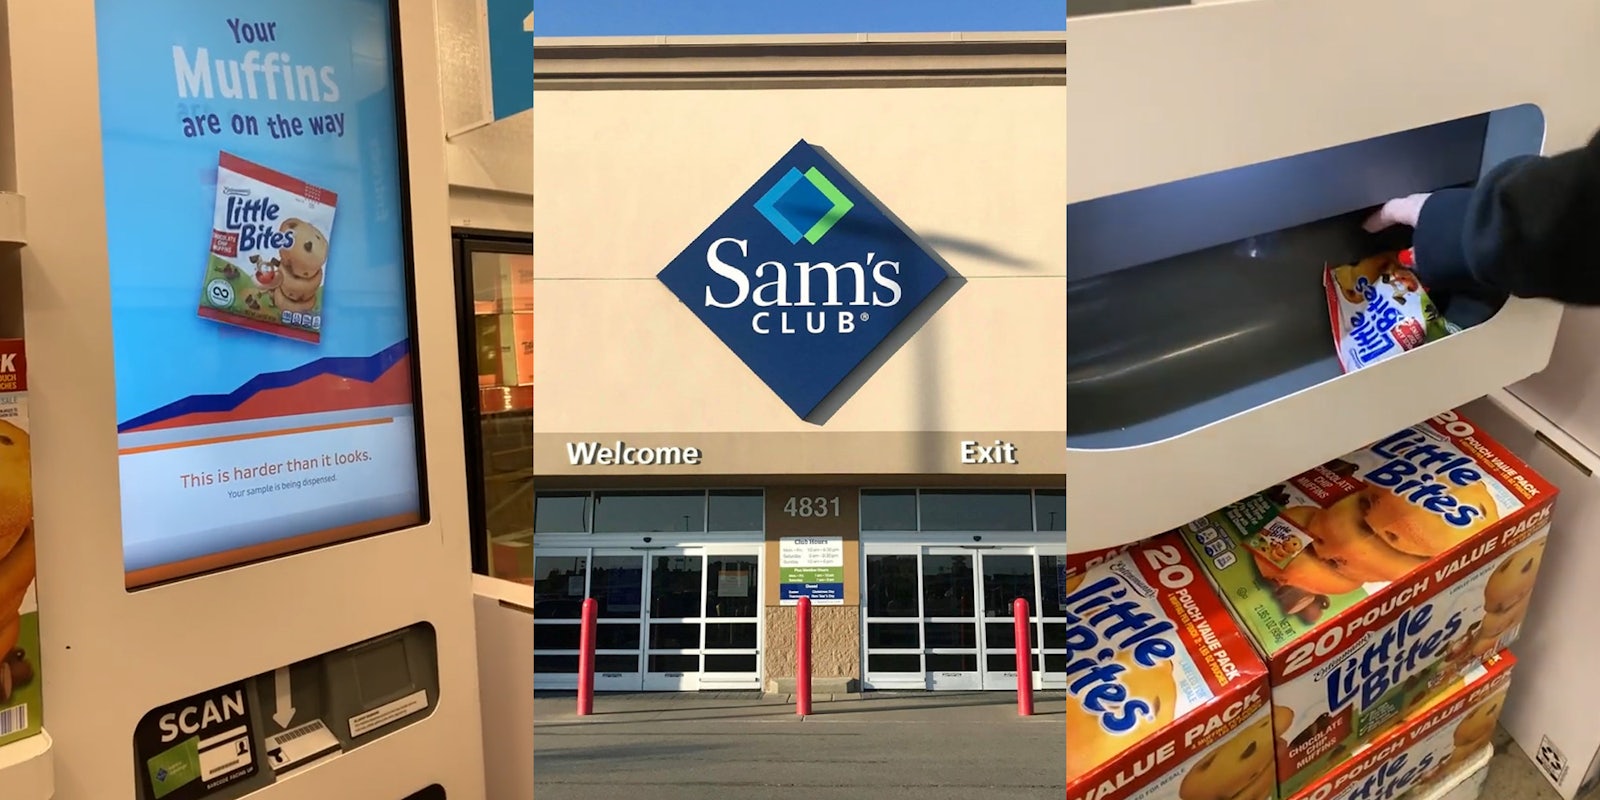 Sam's Club samples machine for Little Bites with caption on screen 'This is harder than it looks.' (l) Sam's club sign on building (c) Sam's Club customer grabbing Little Bites sample from machine (r)